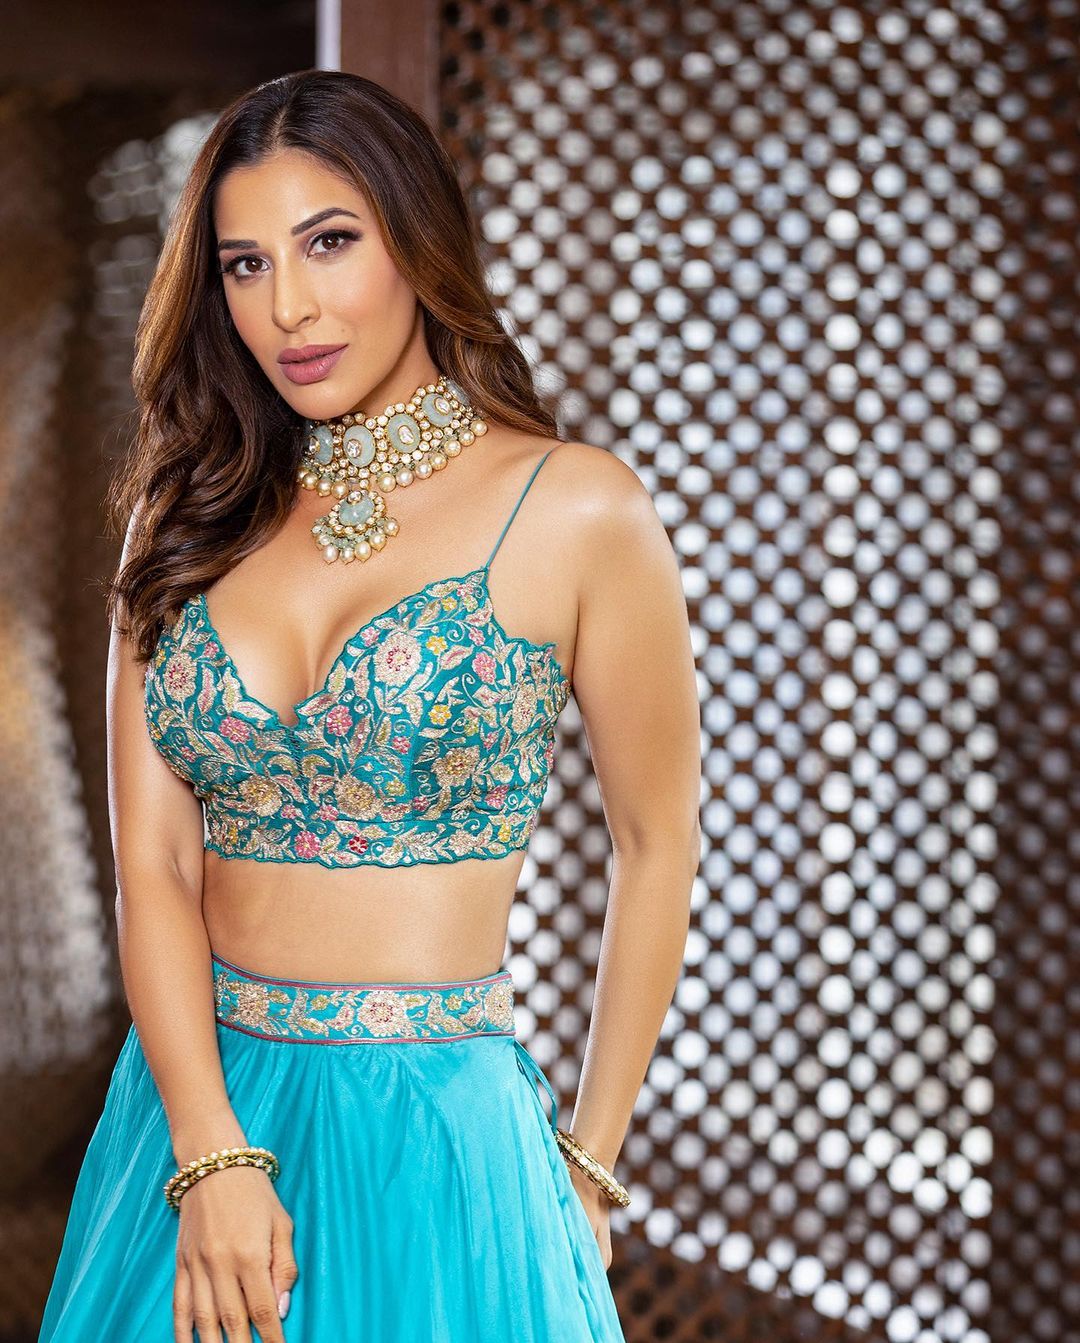 Sophie Choudry flaunts her toned figure in the floral sleeveless choli.